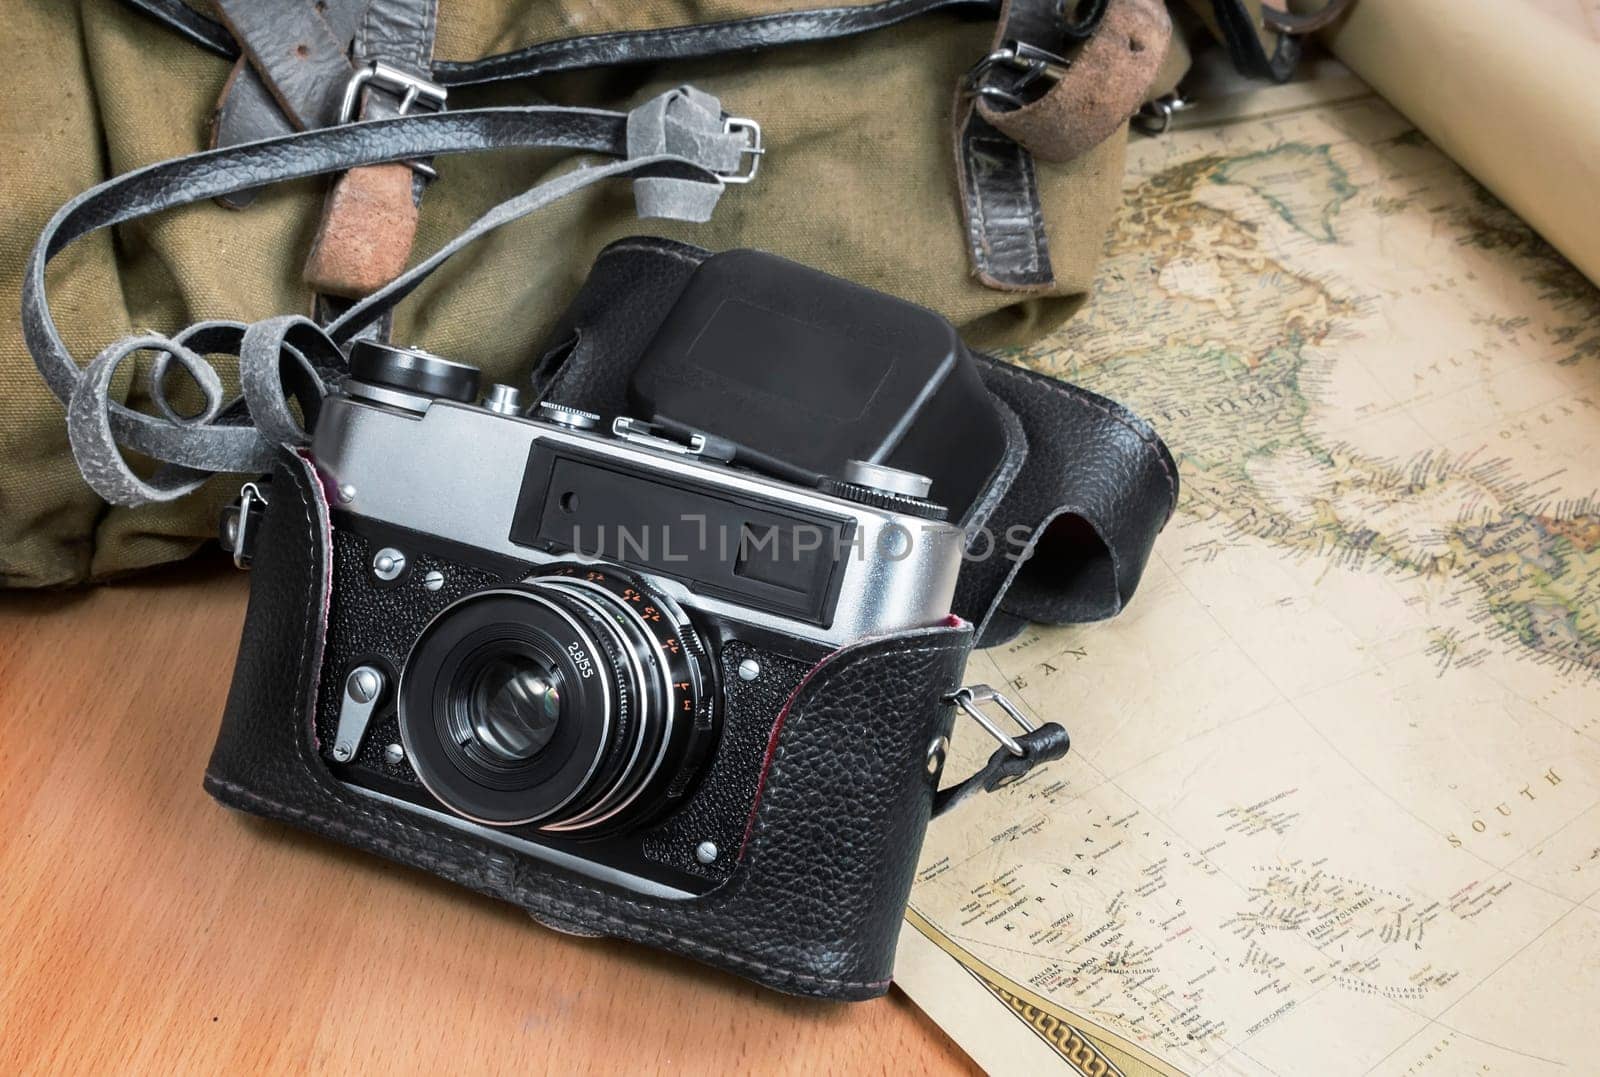 Items needed for travel: a large backpack, camera, map of the world. Vintage items in retro style